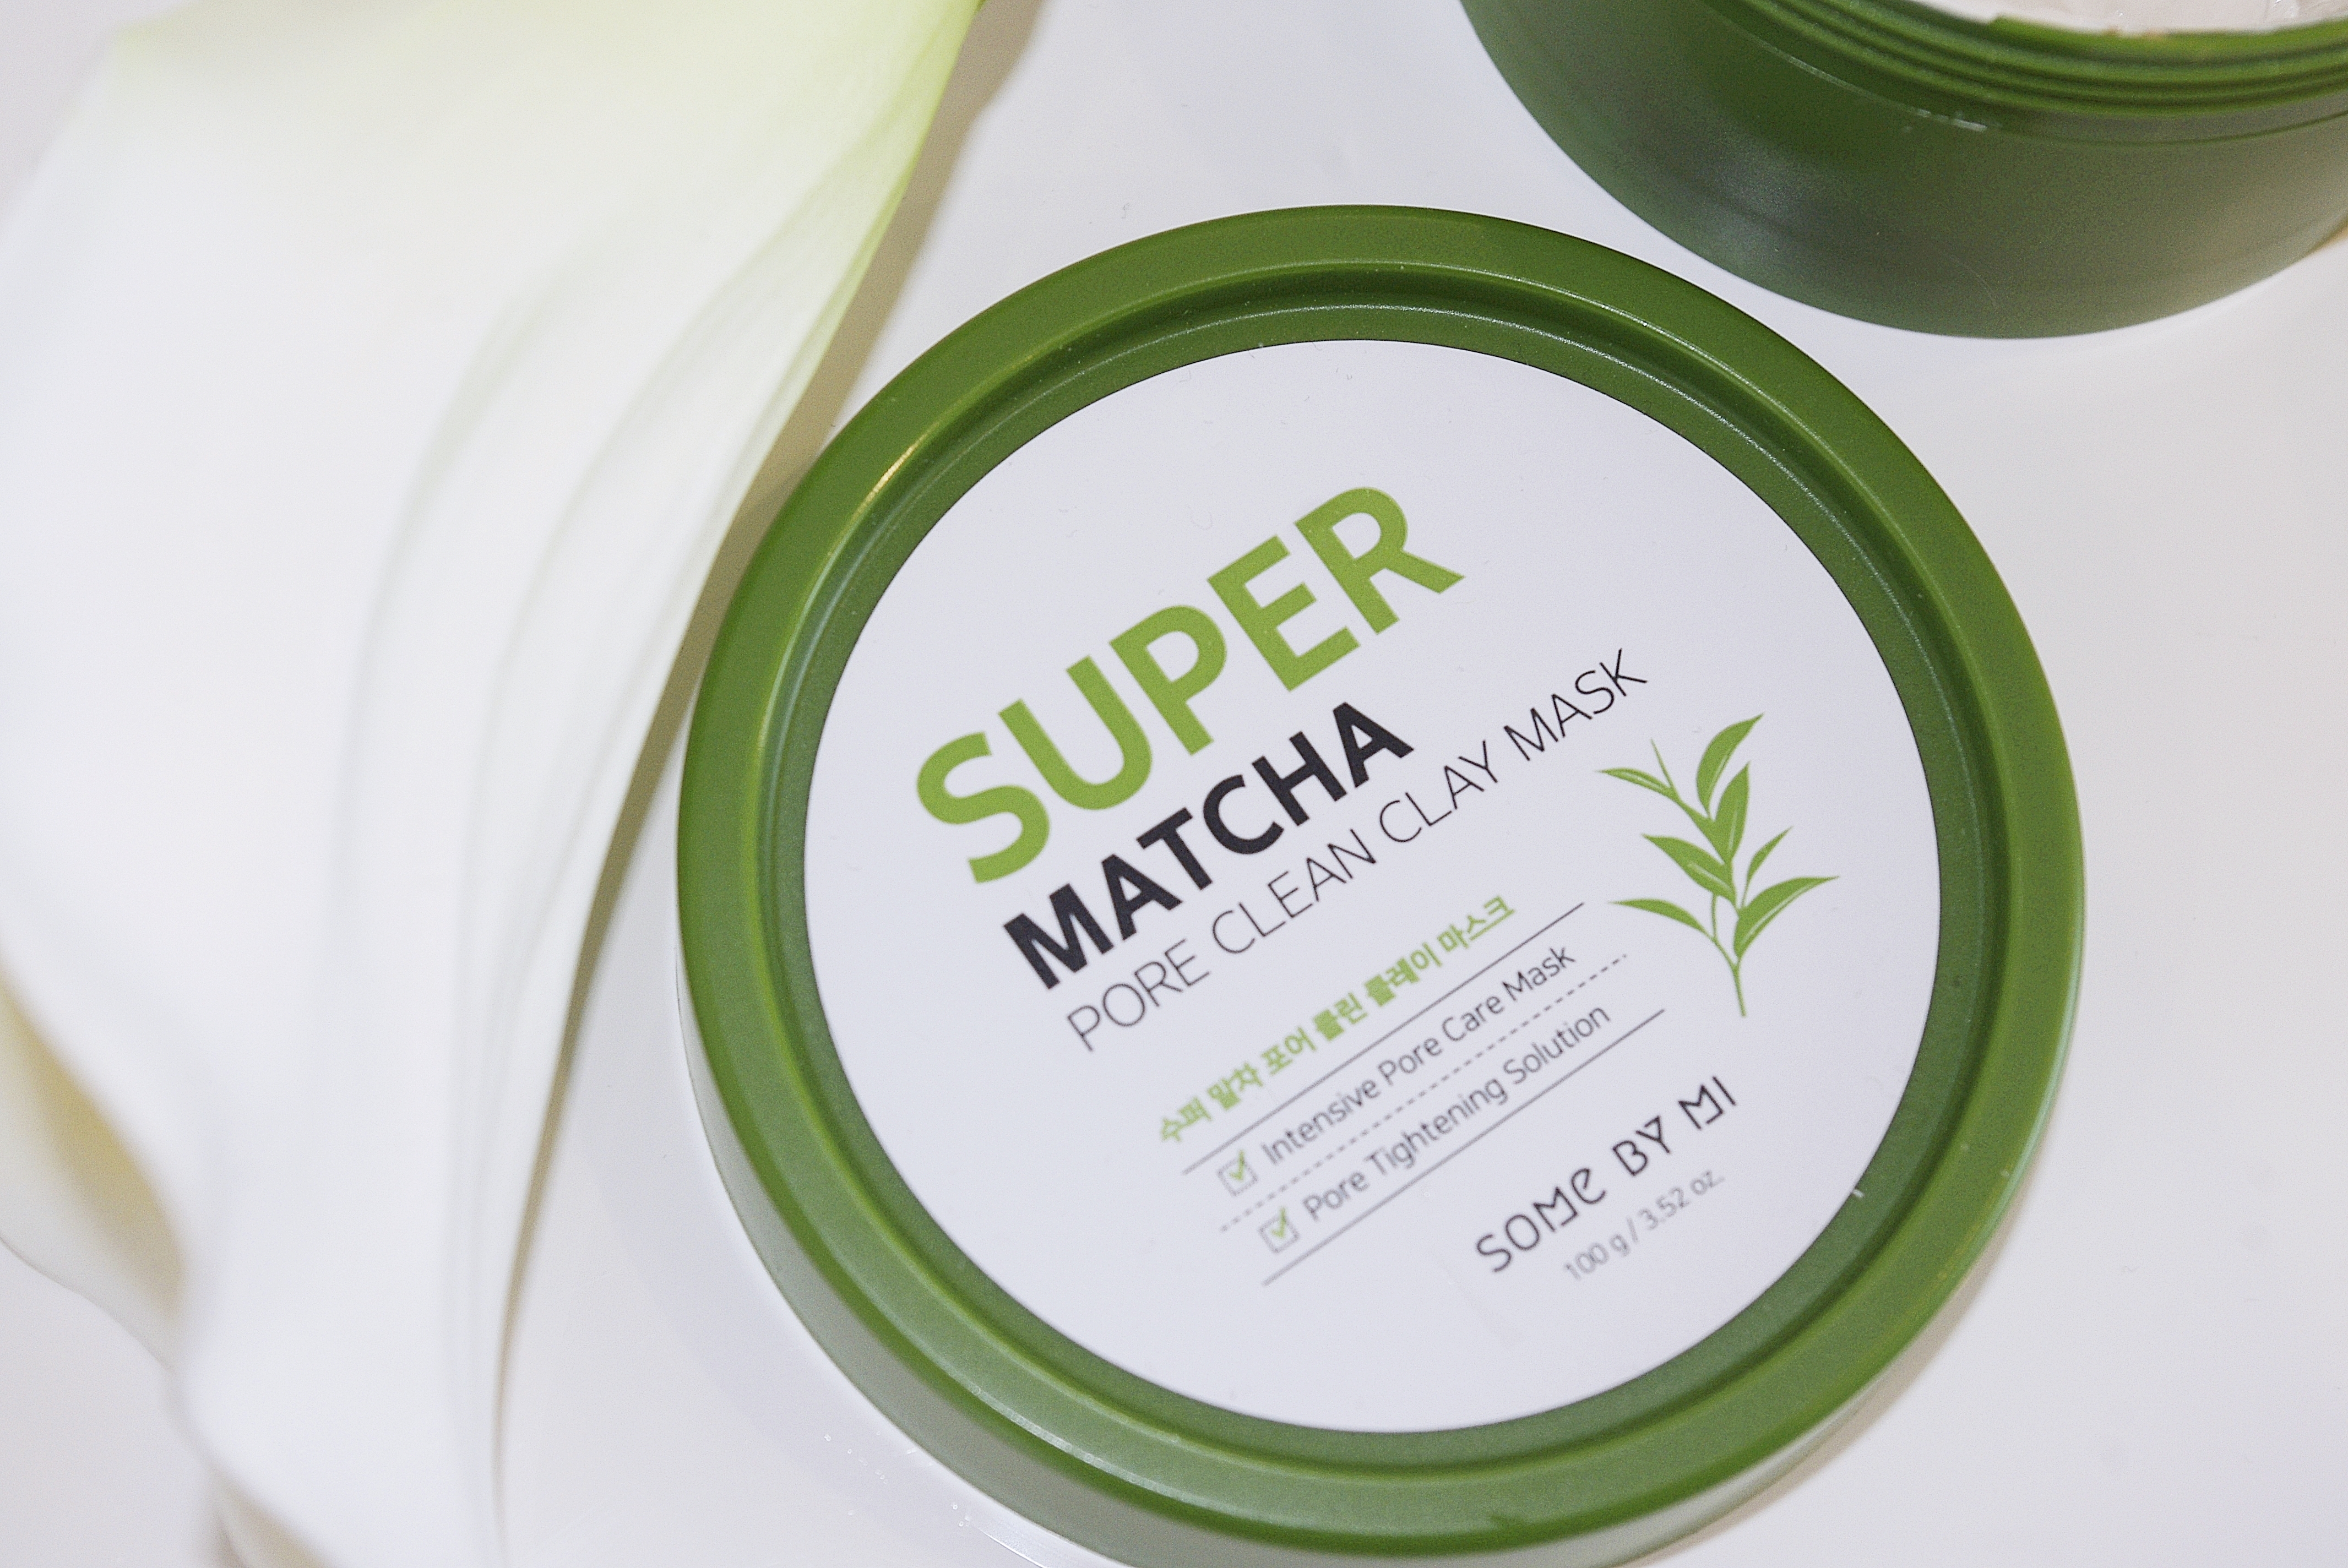 SOME BY MI Super Matcha Pore Clean Clay Mask